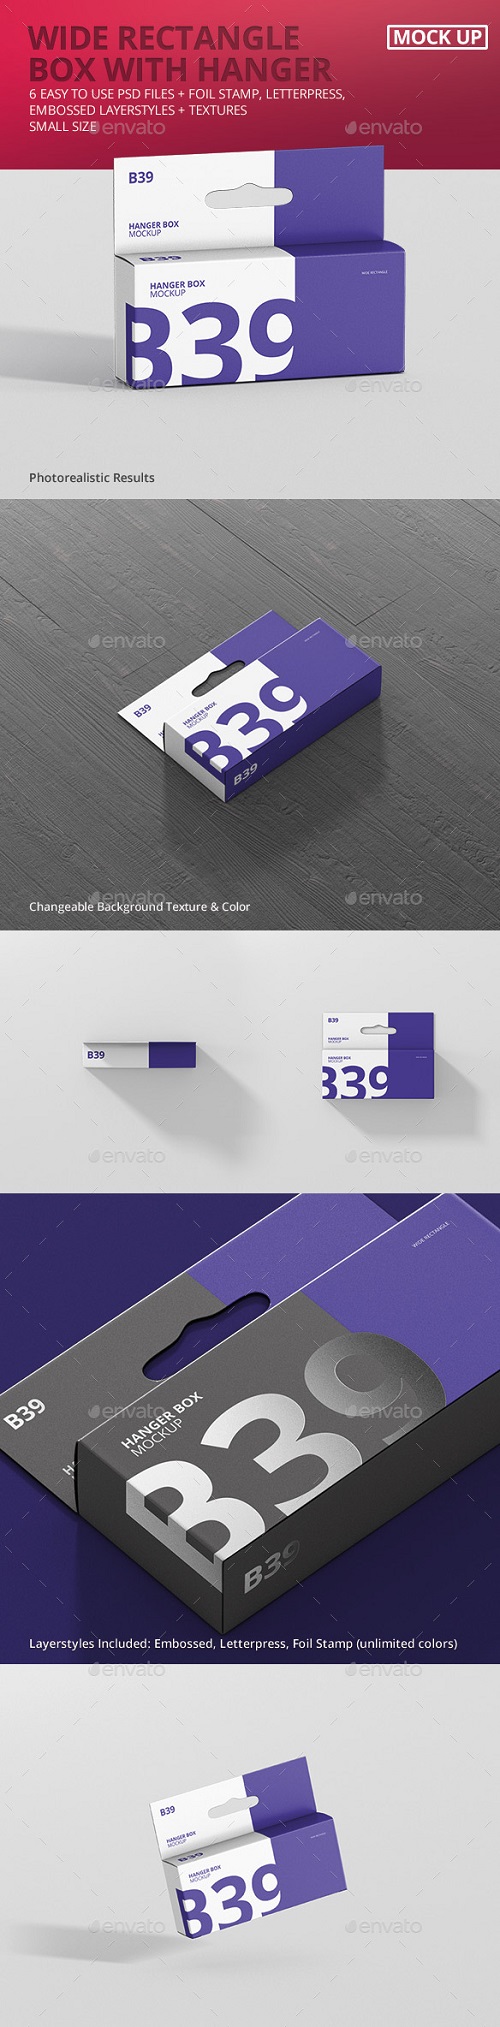 Box Mockup - Wide Small Rectangle with Hanger 21332930